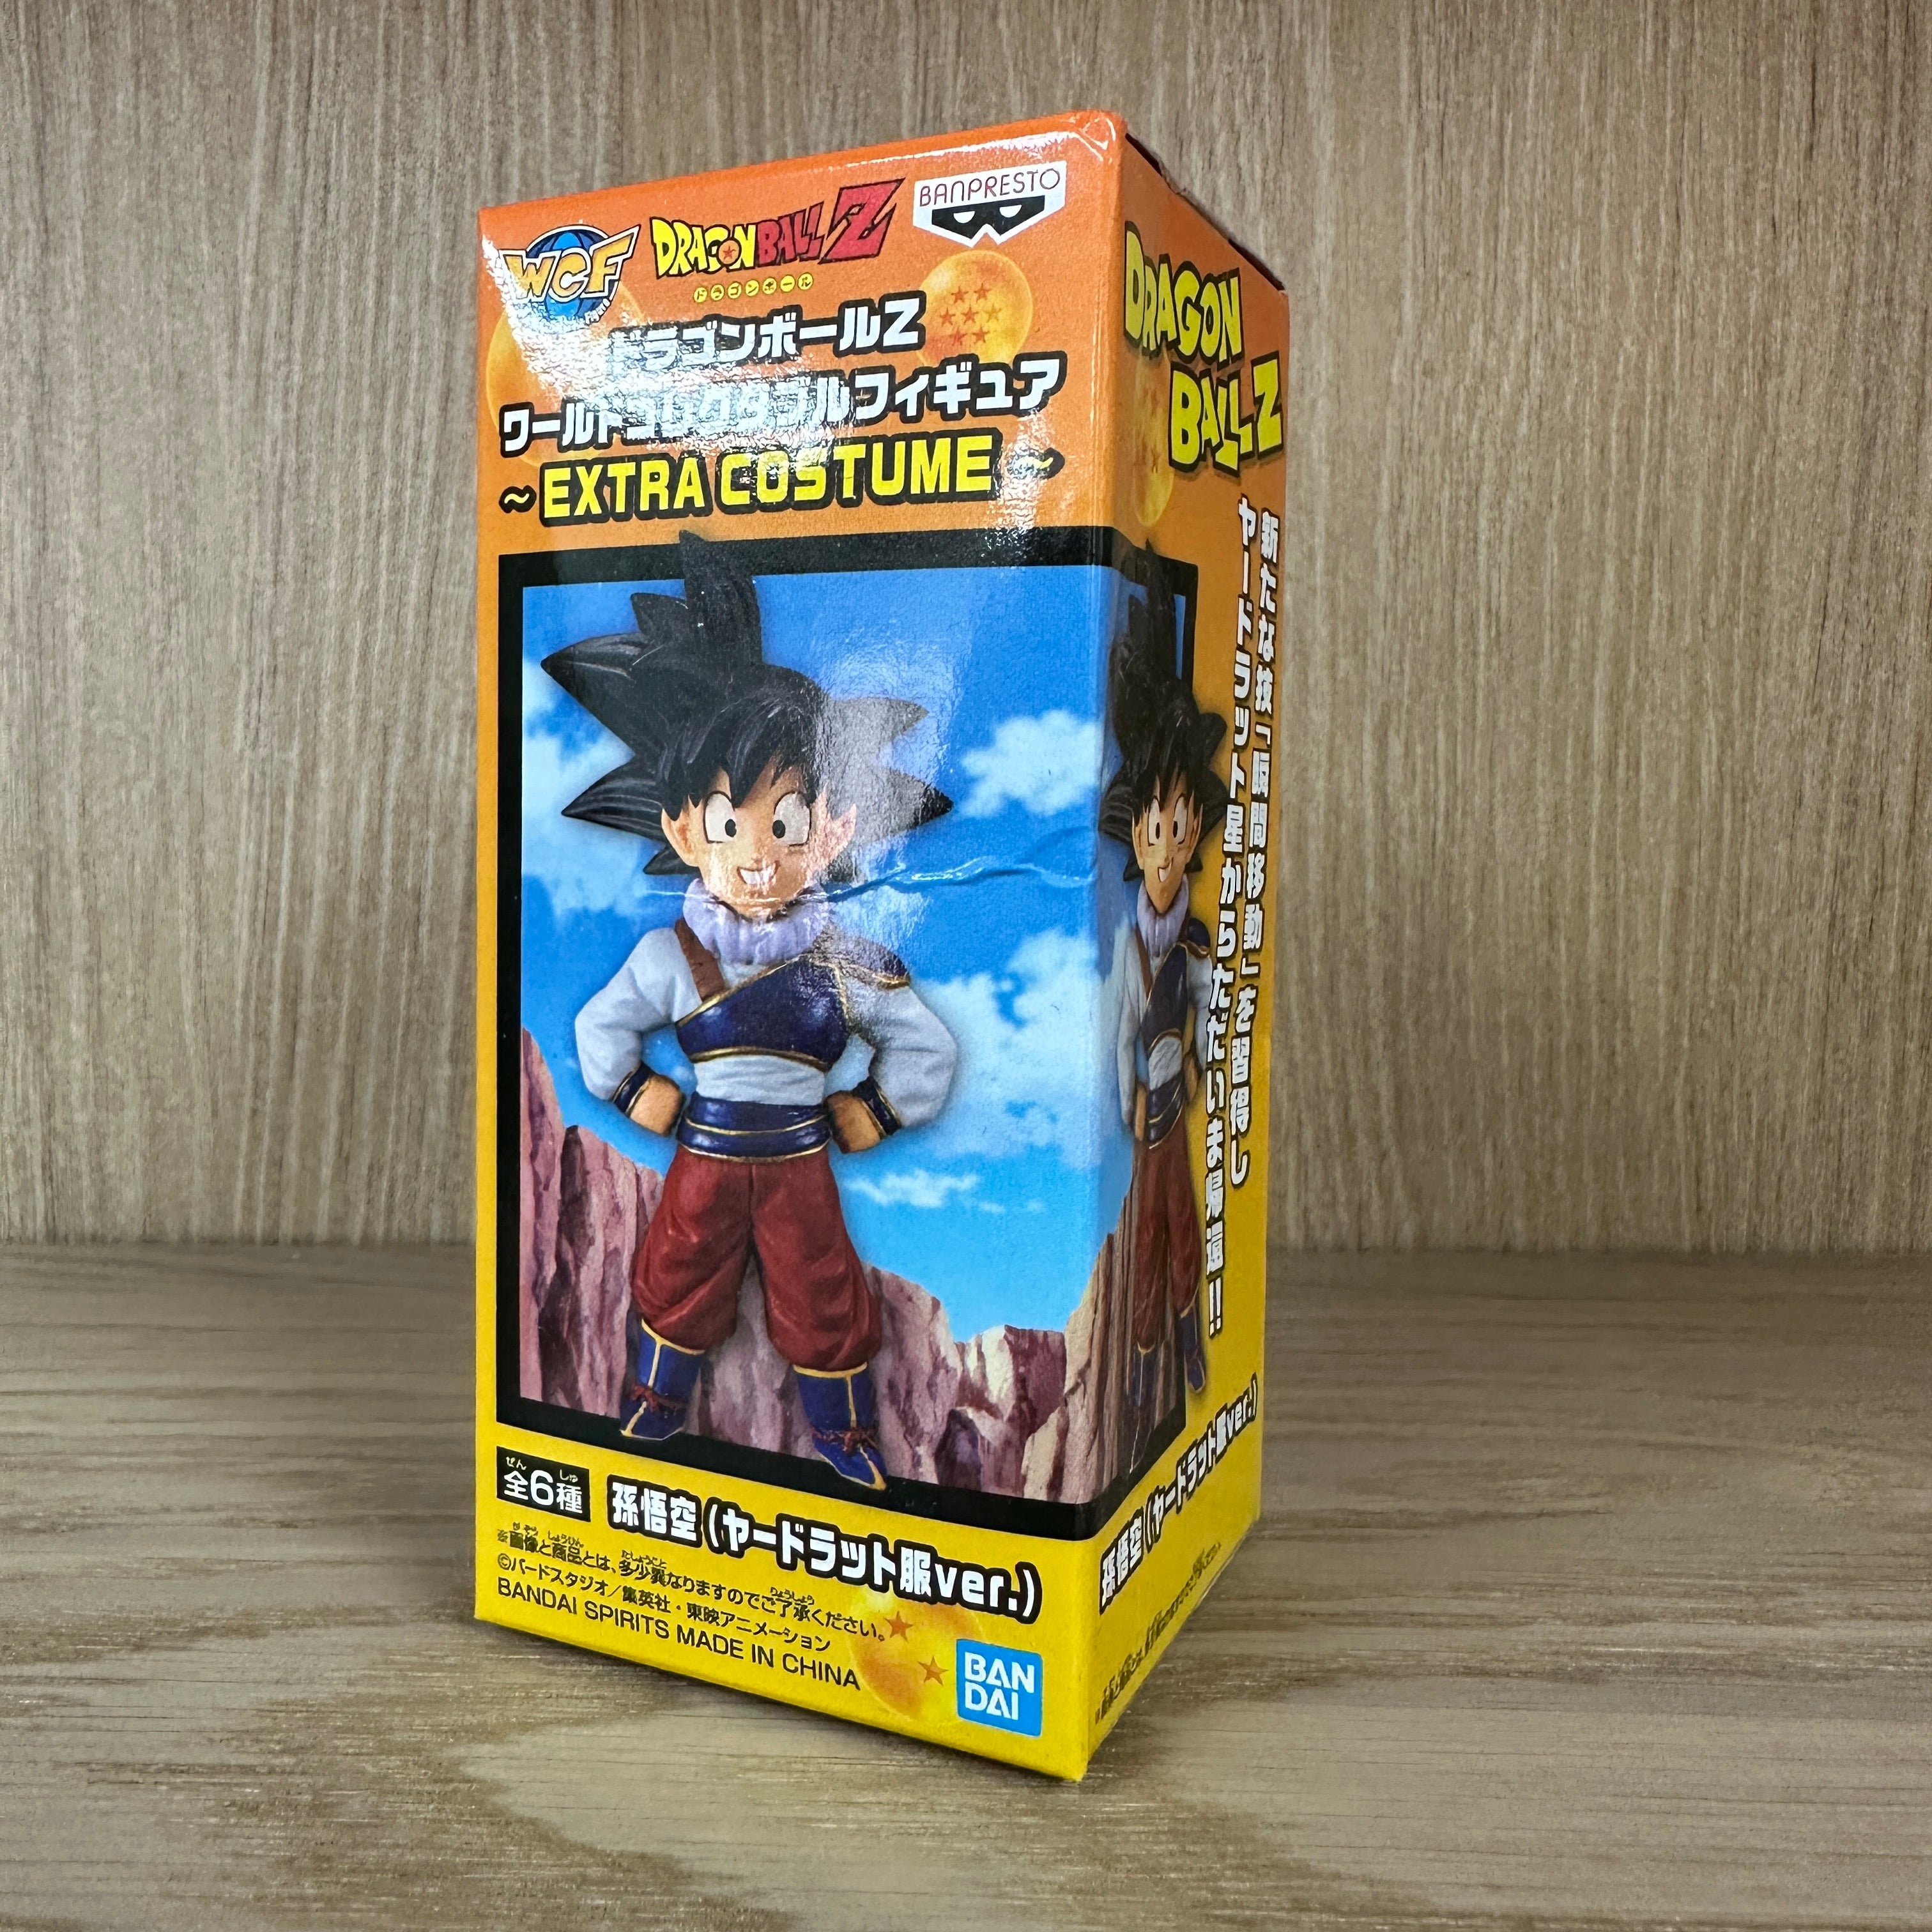 DRAGON BALL Z WCF World Collectable Figure ~ EXTRA COSTUME ~